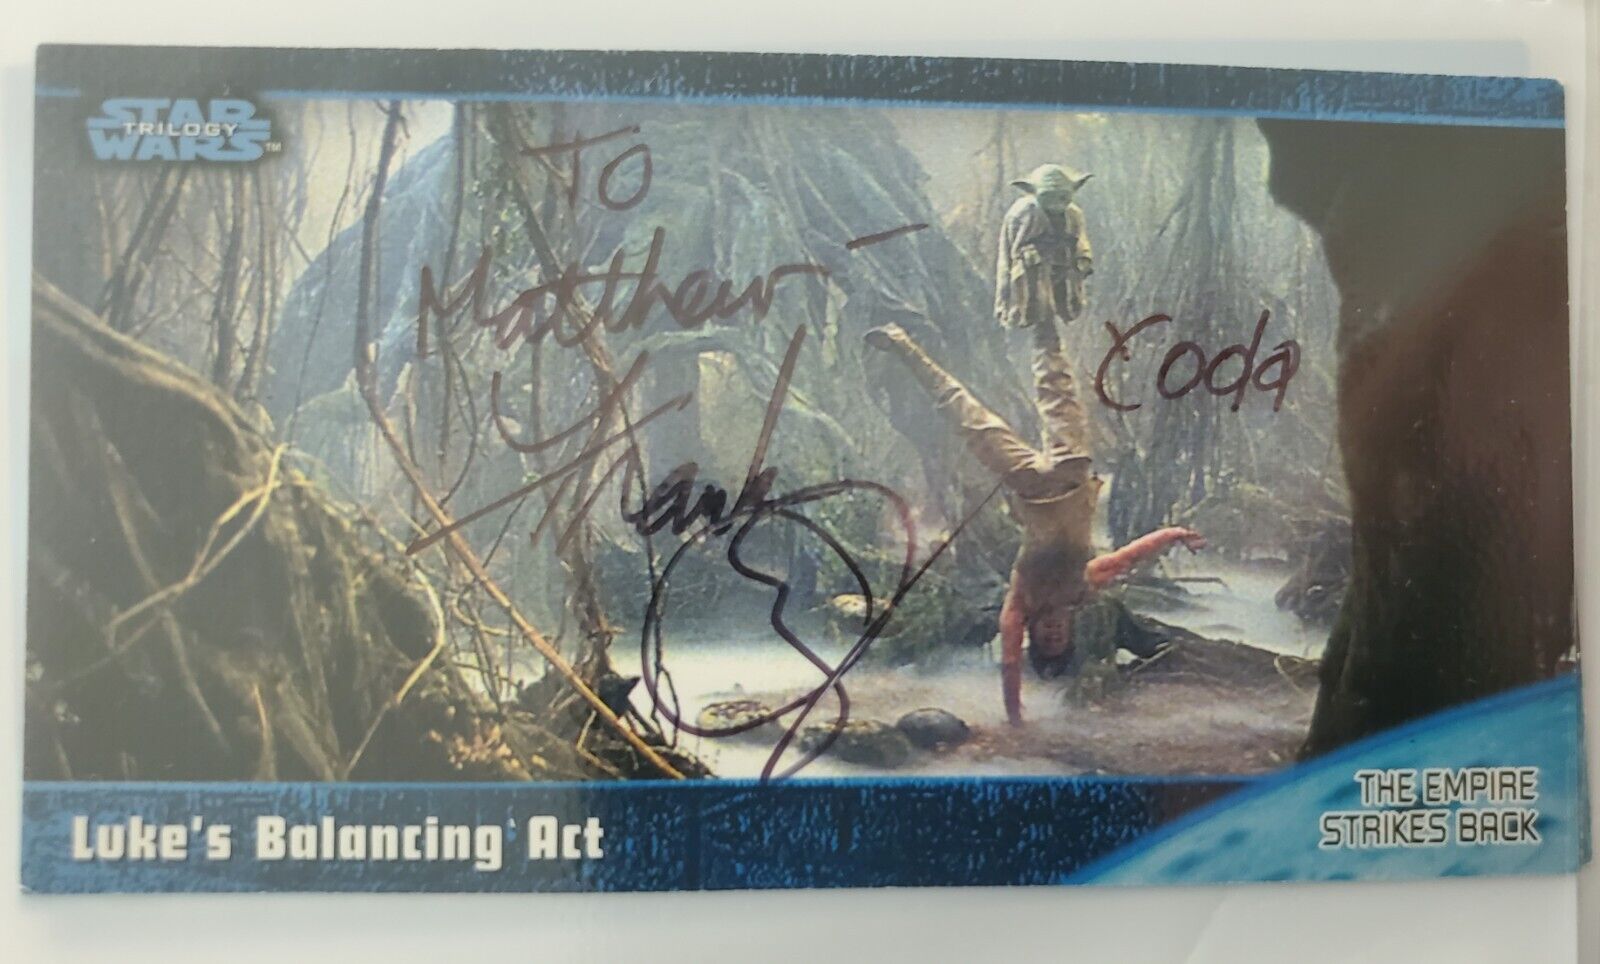 Frank Oz Signed Topps Widevision Card Star Wars Yoda Autograph 